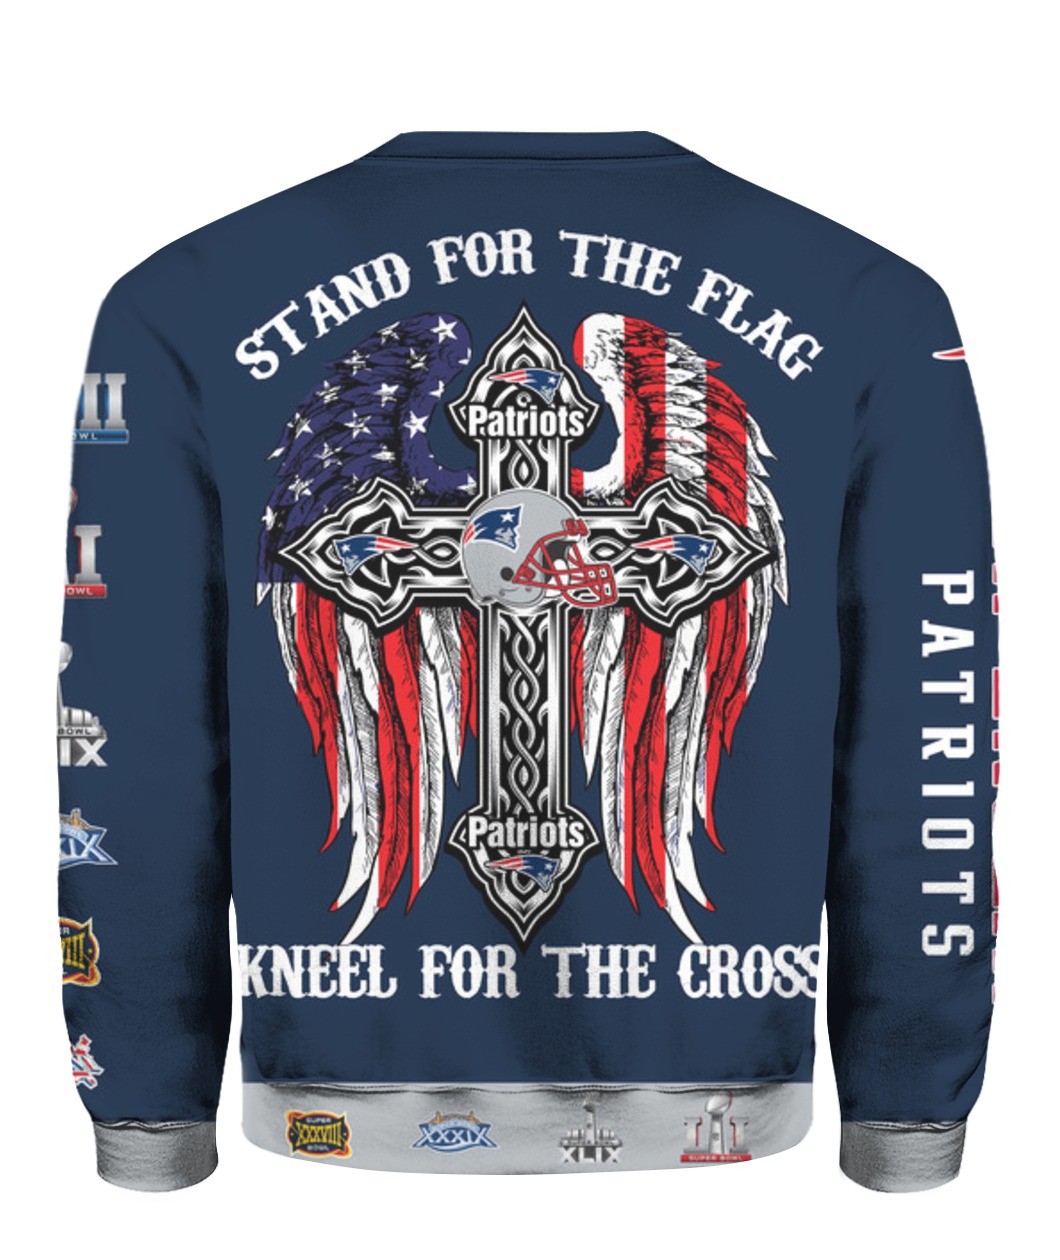 Stand for the flag kneel for the cross new england patriots all over print sweatshirt - back